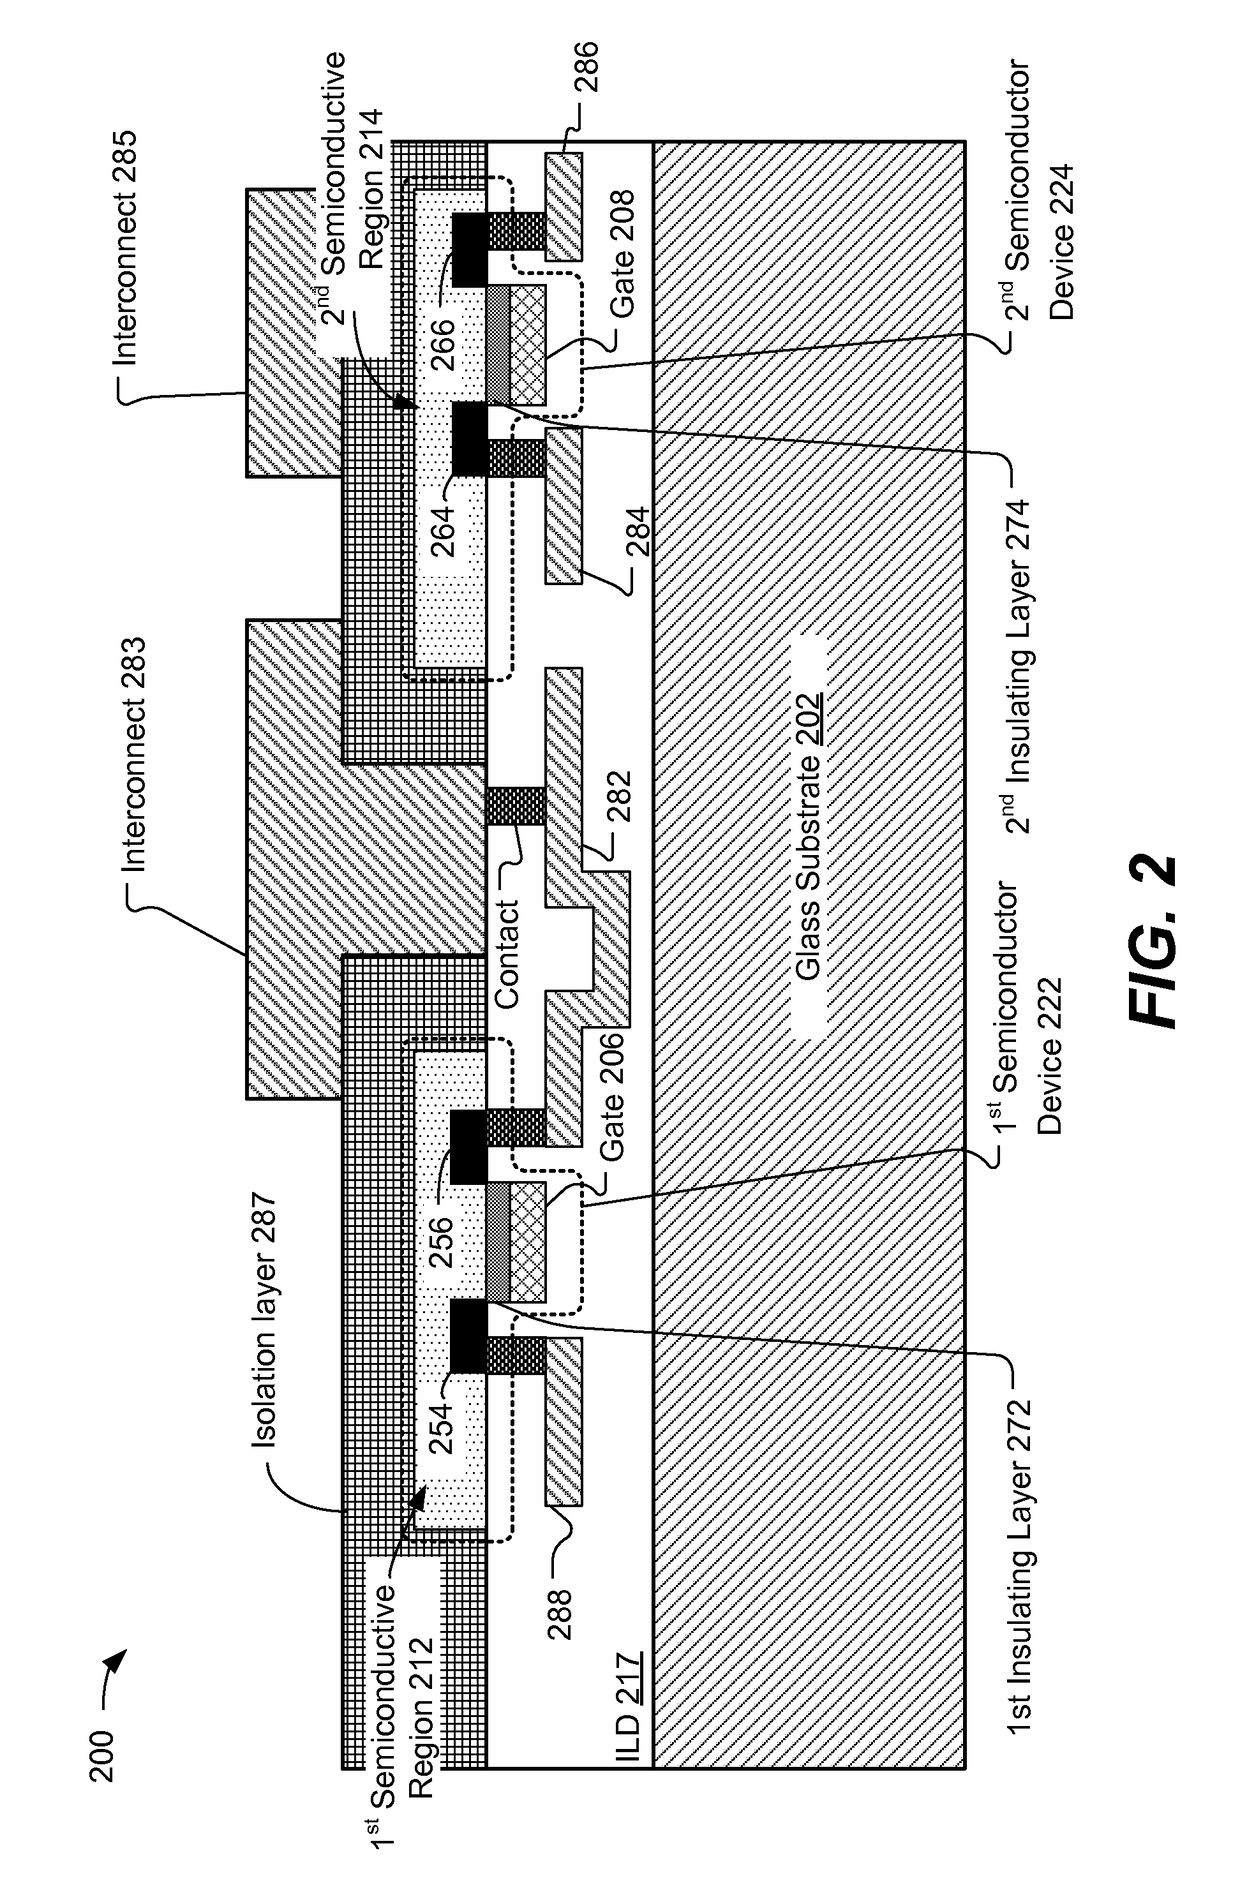 Integrated circuits (ICS) on a glass substrate